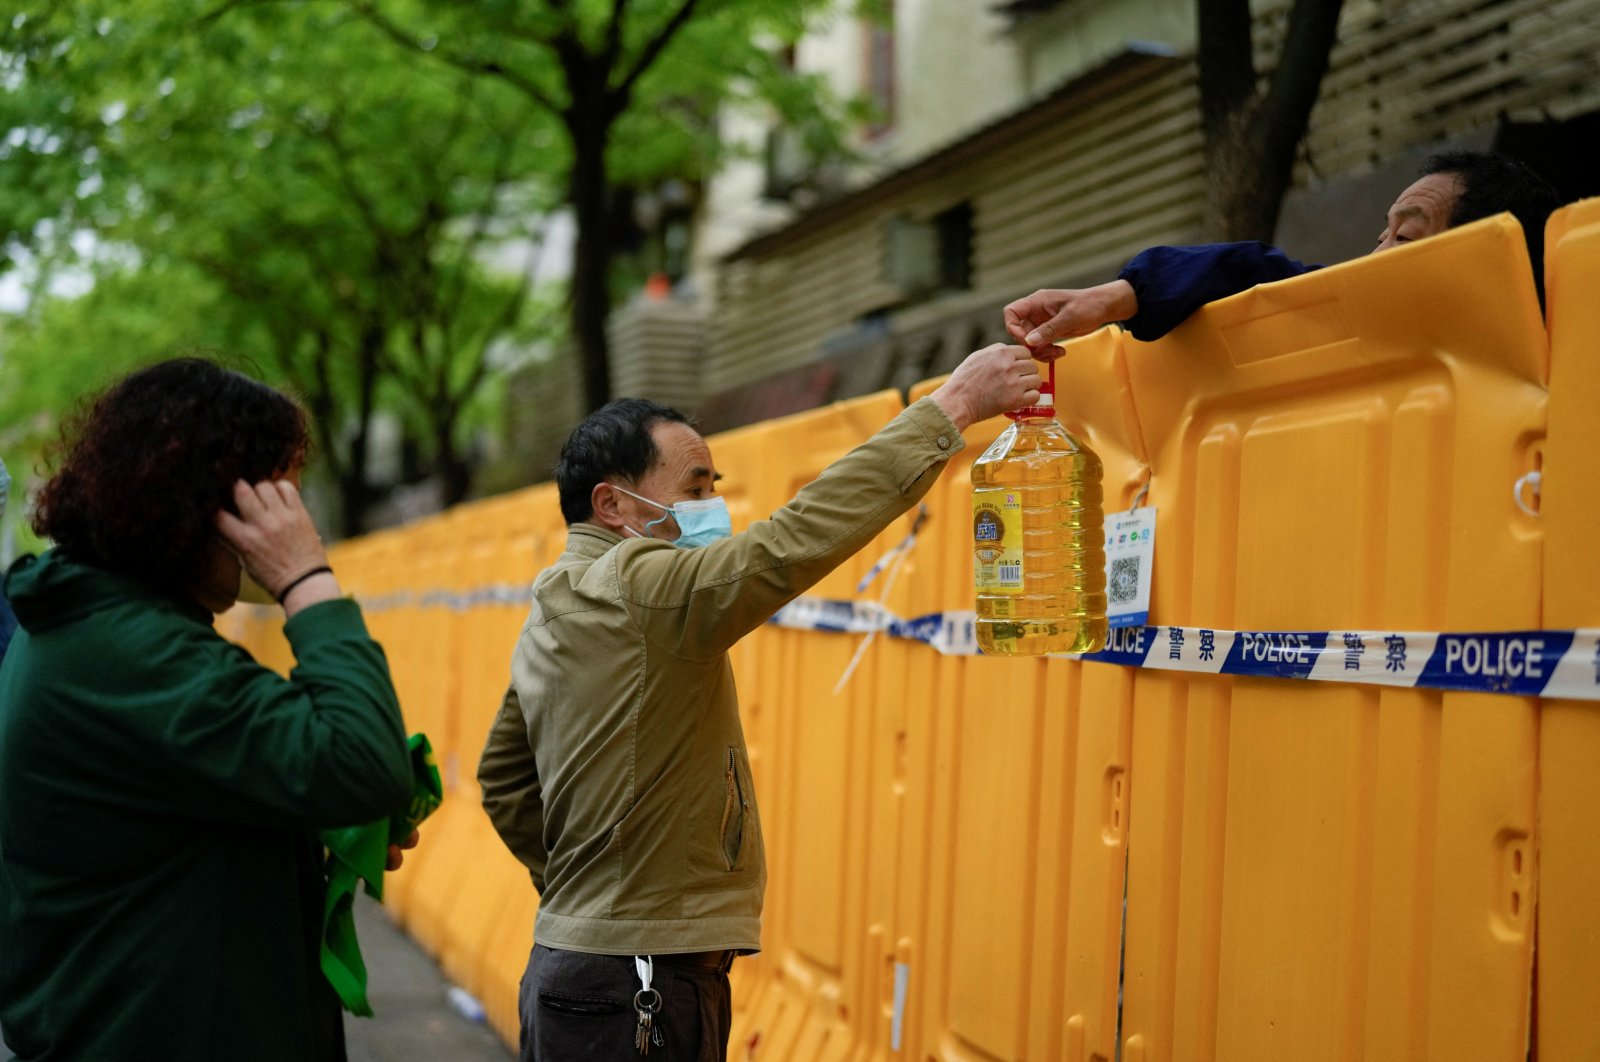 People pass edible oil over the barriers at a street market under lockdown amid COVID-19 pandemic, Shanghai, China, April 13, 2022. (REUTERS PHOTO)